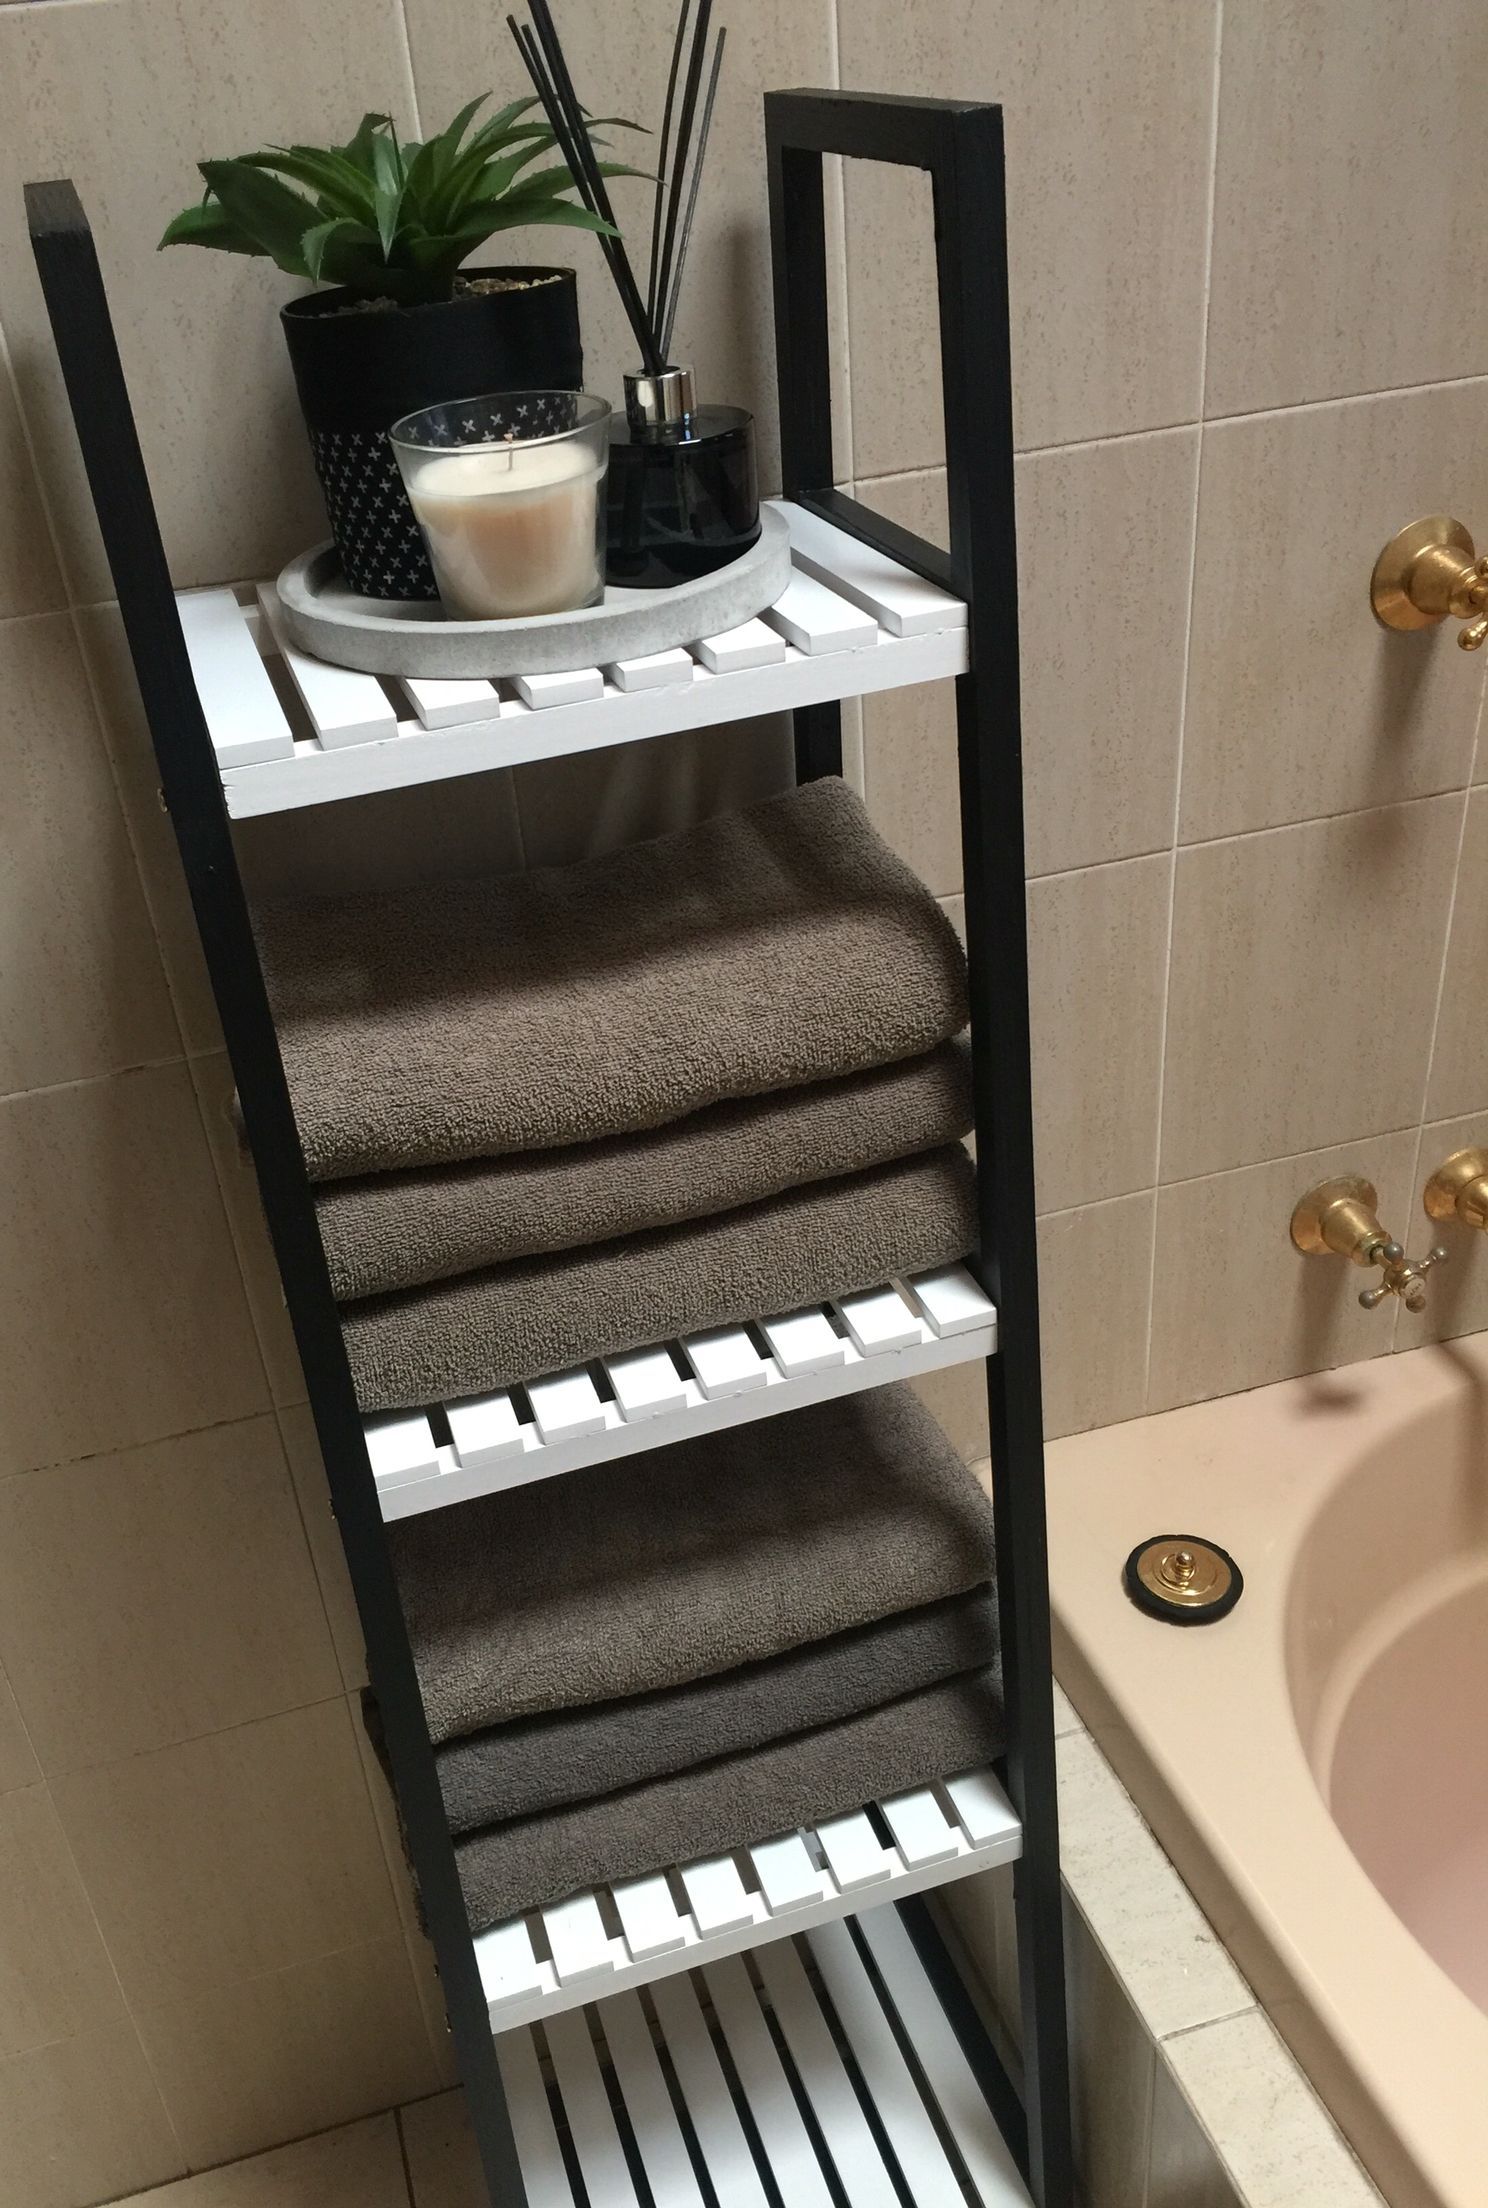 Kmart hack bathroom caddy shelves painted black and white to make it more modern #kmarthack